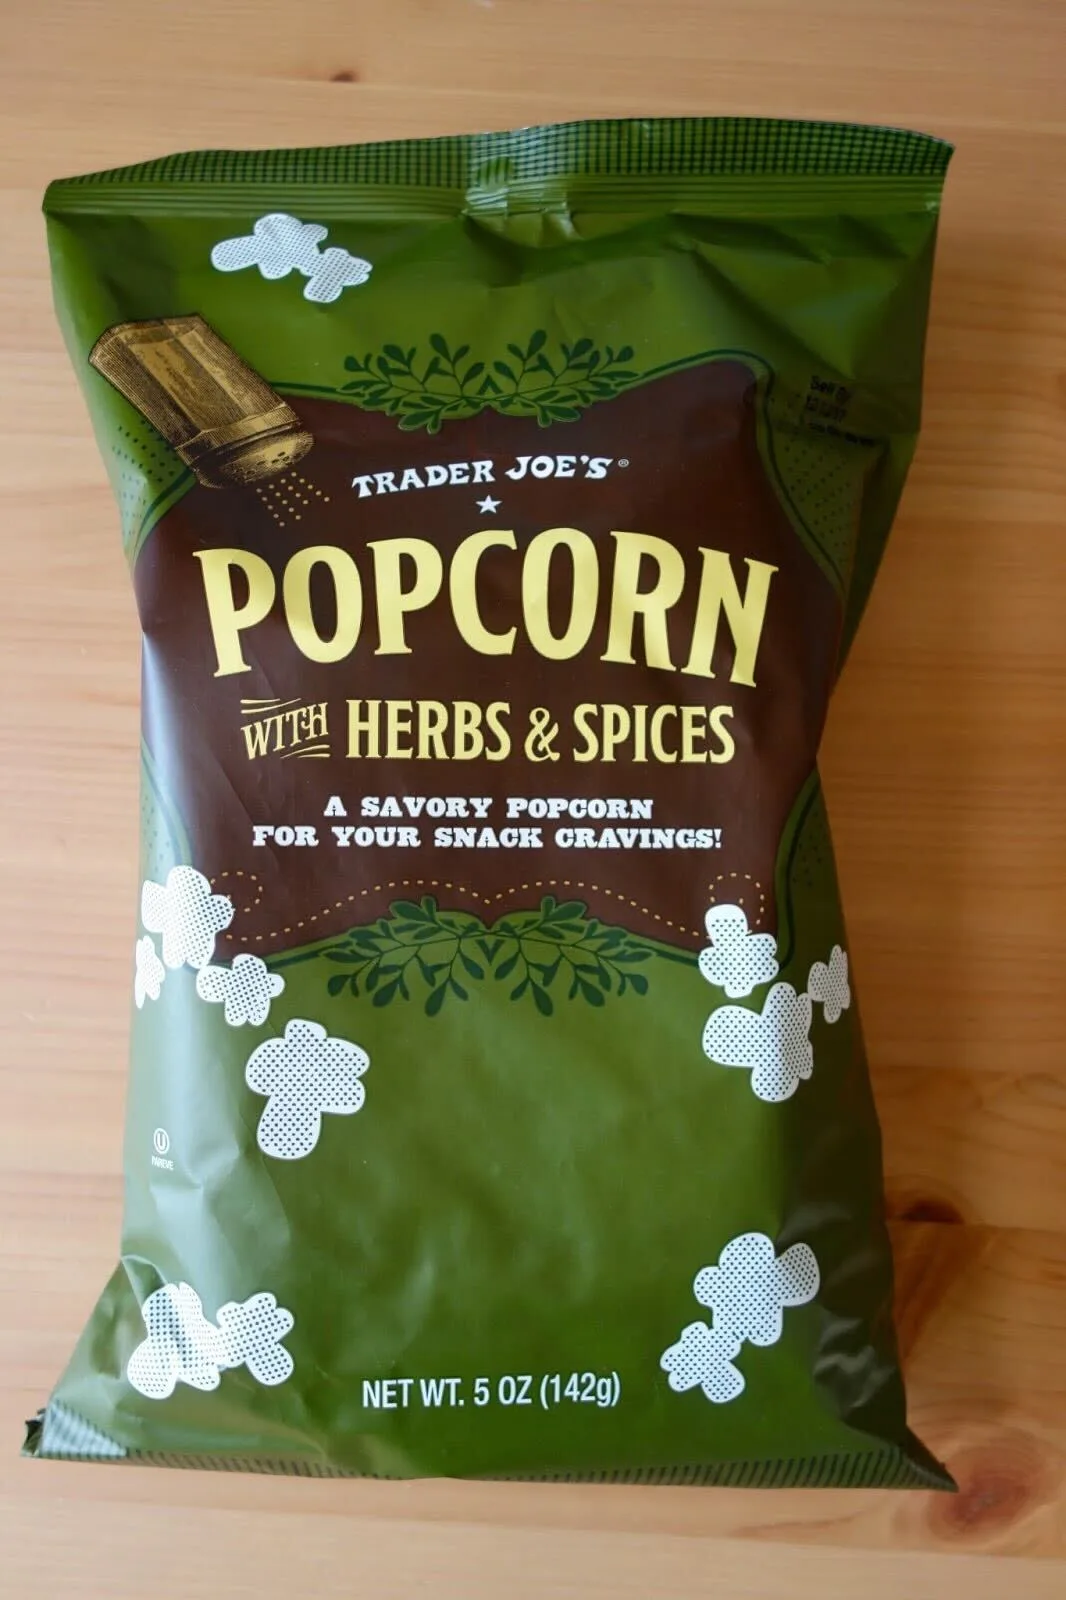 dairy-free trader joe's snack popcorn with herbs and spices high fiber